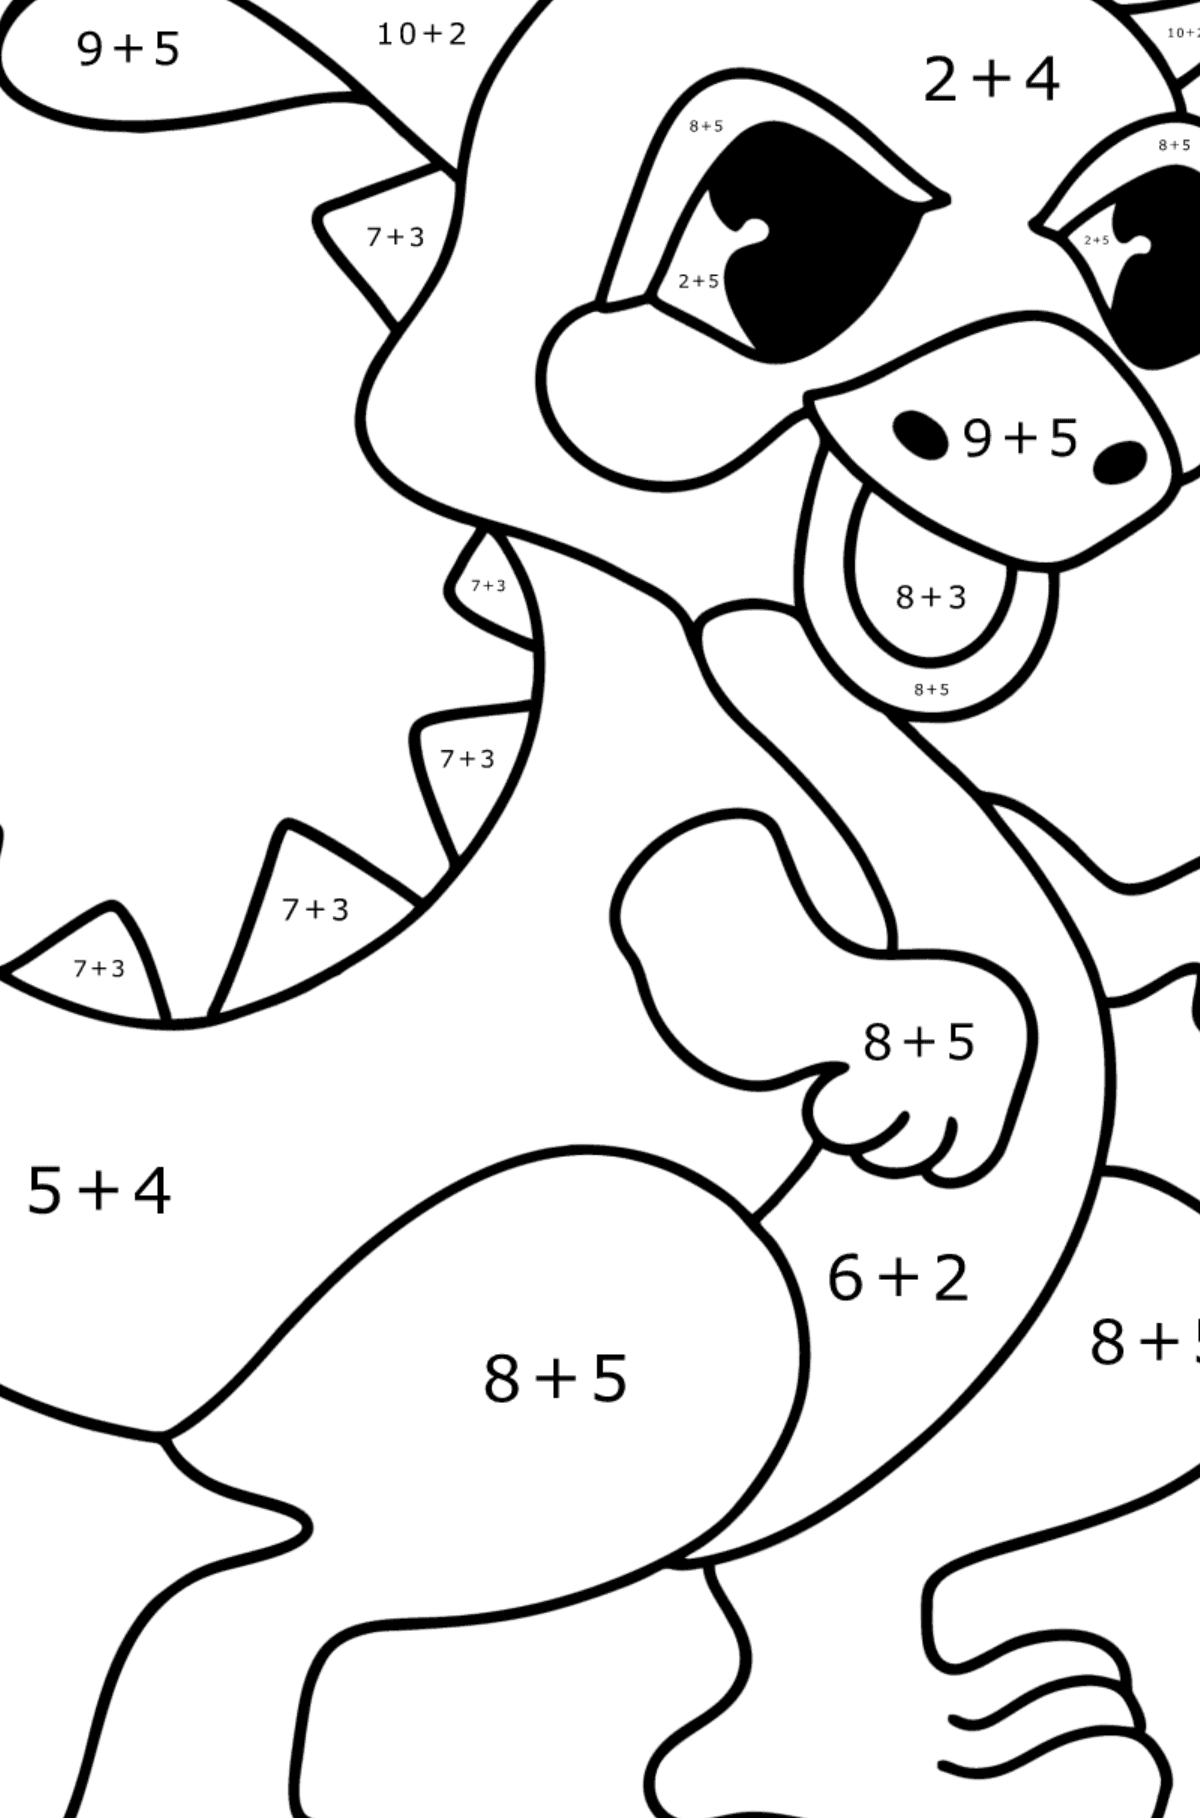 Cartoon dragon coloring page - Math Coloring - Addition for Kids